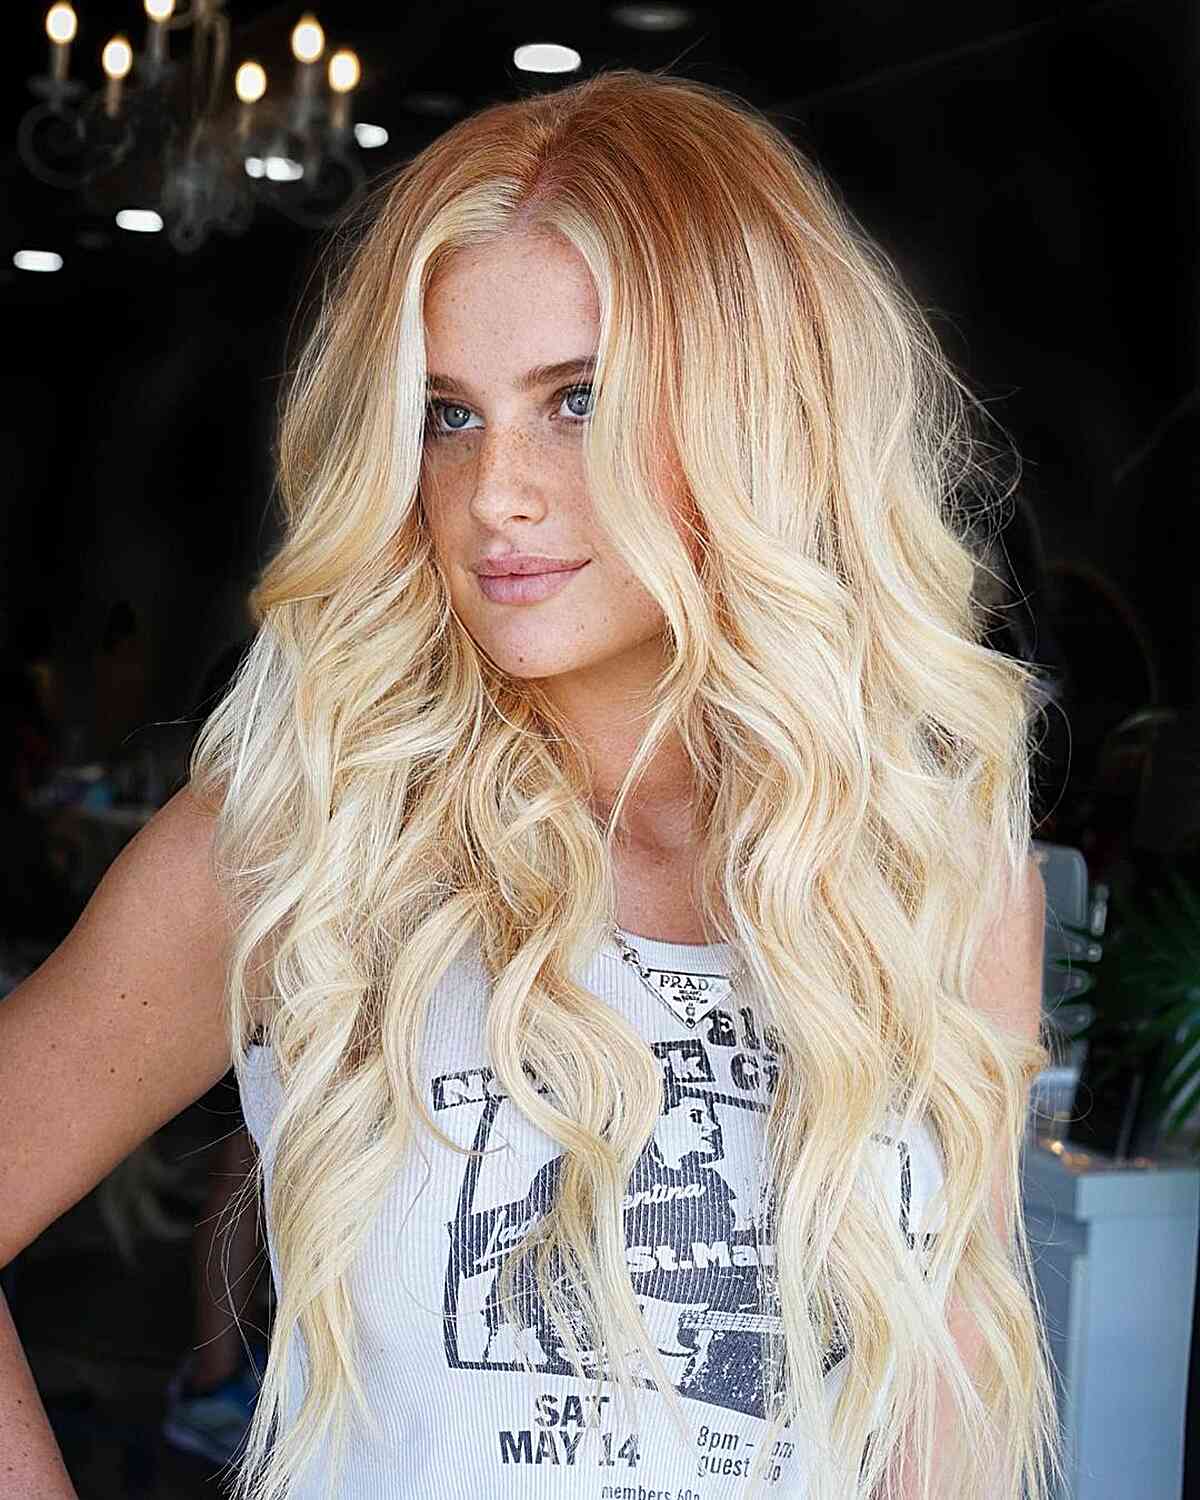 25 Mid-Length Blonde Hairstyles To Show Your Stylist Pronto